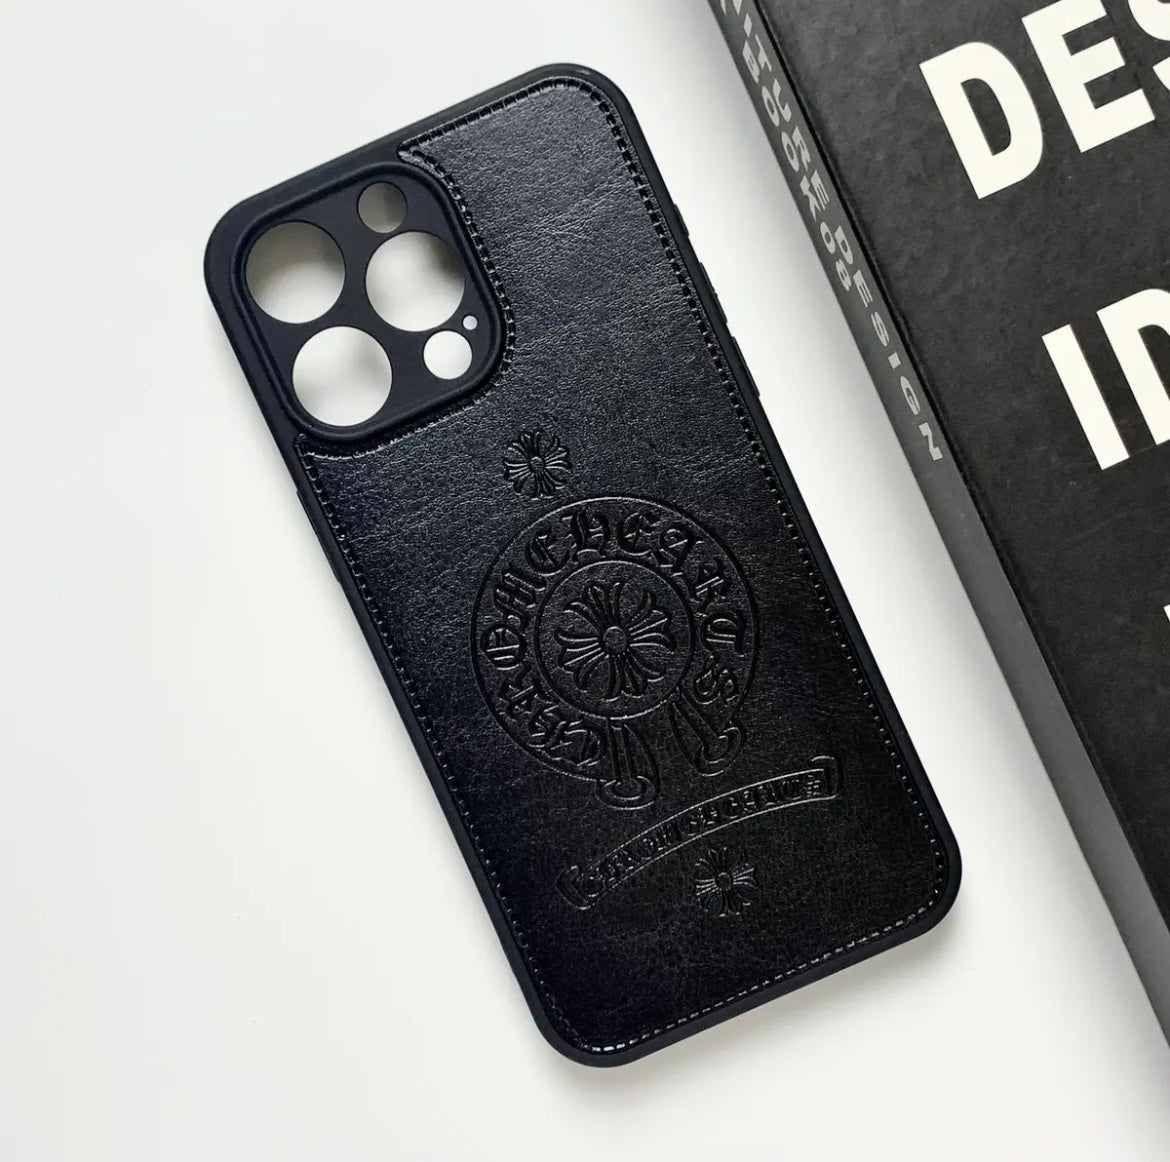 'CHROME HEARTS" IPHONE CASES